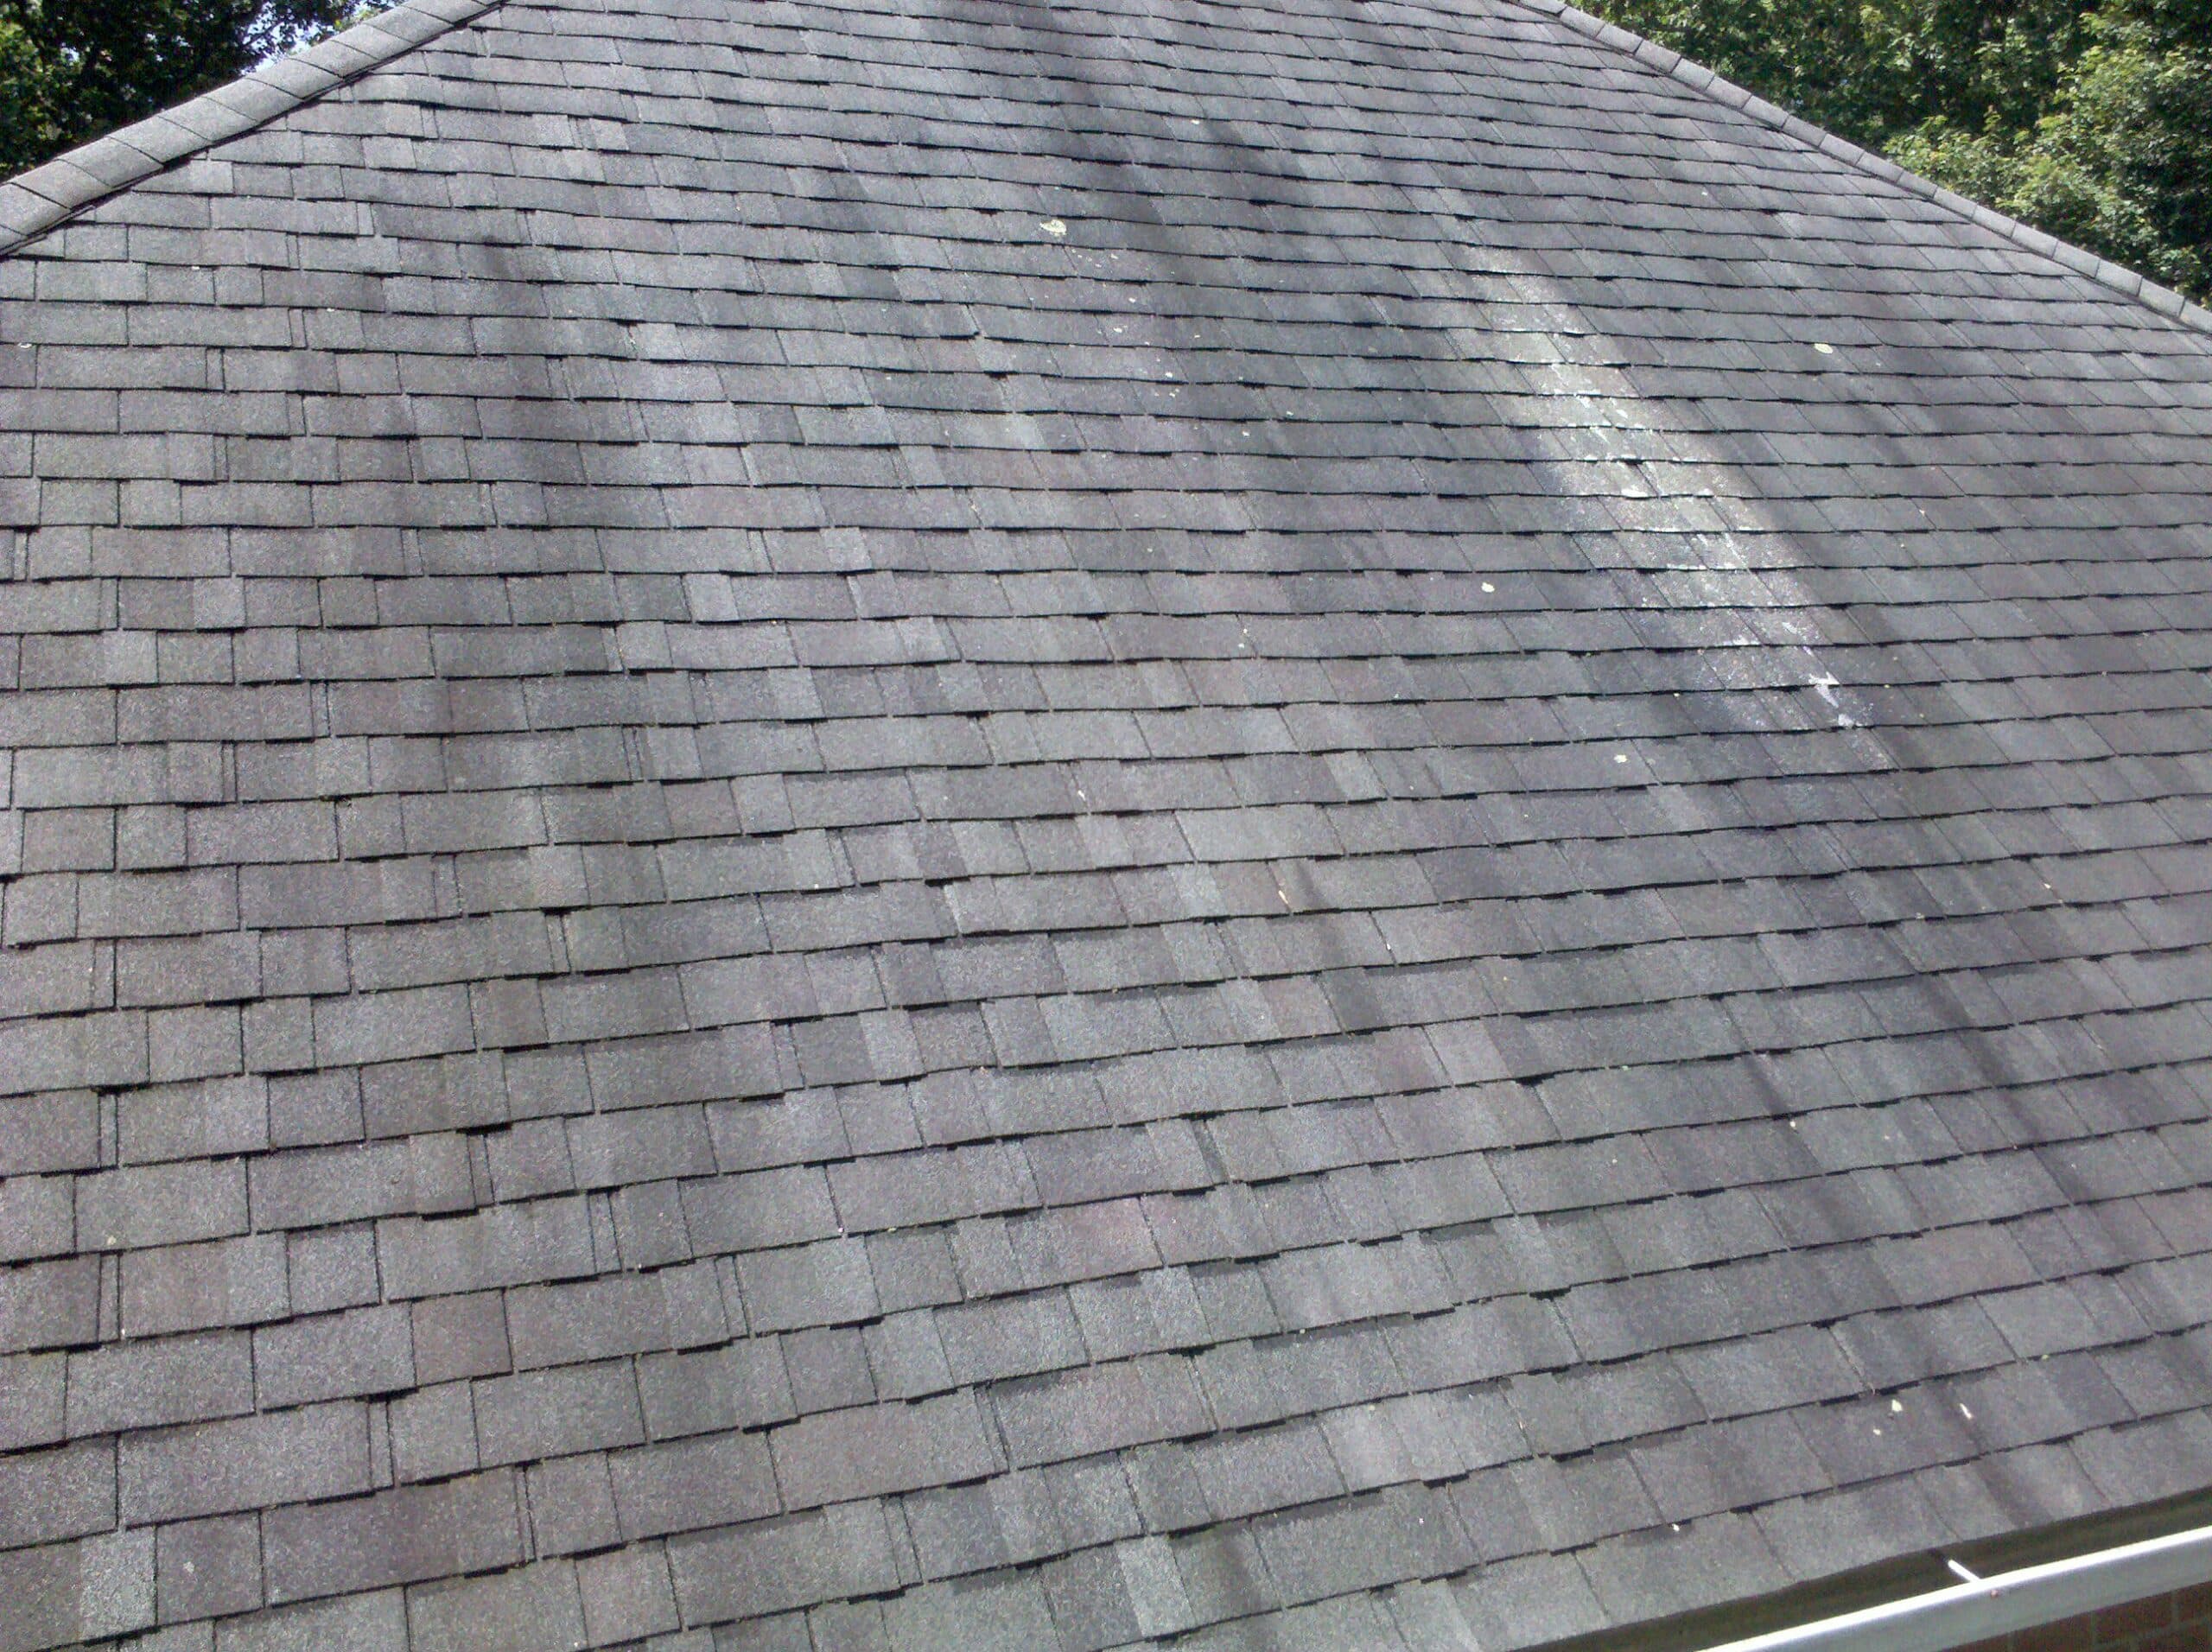 How Do I Get Rid of Black Stains on the Roof?